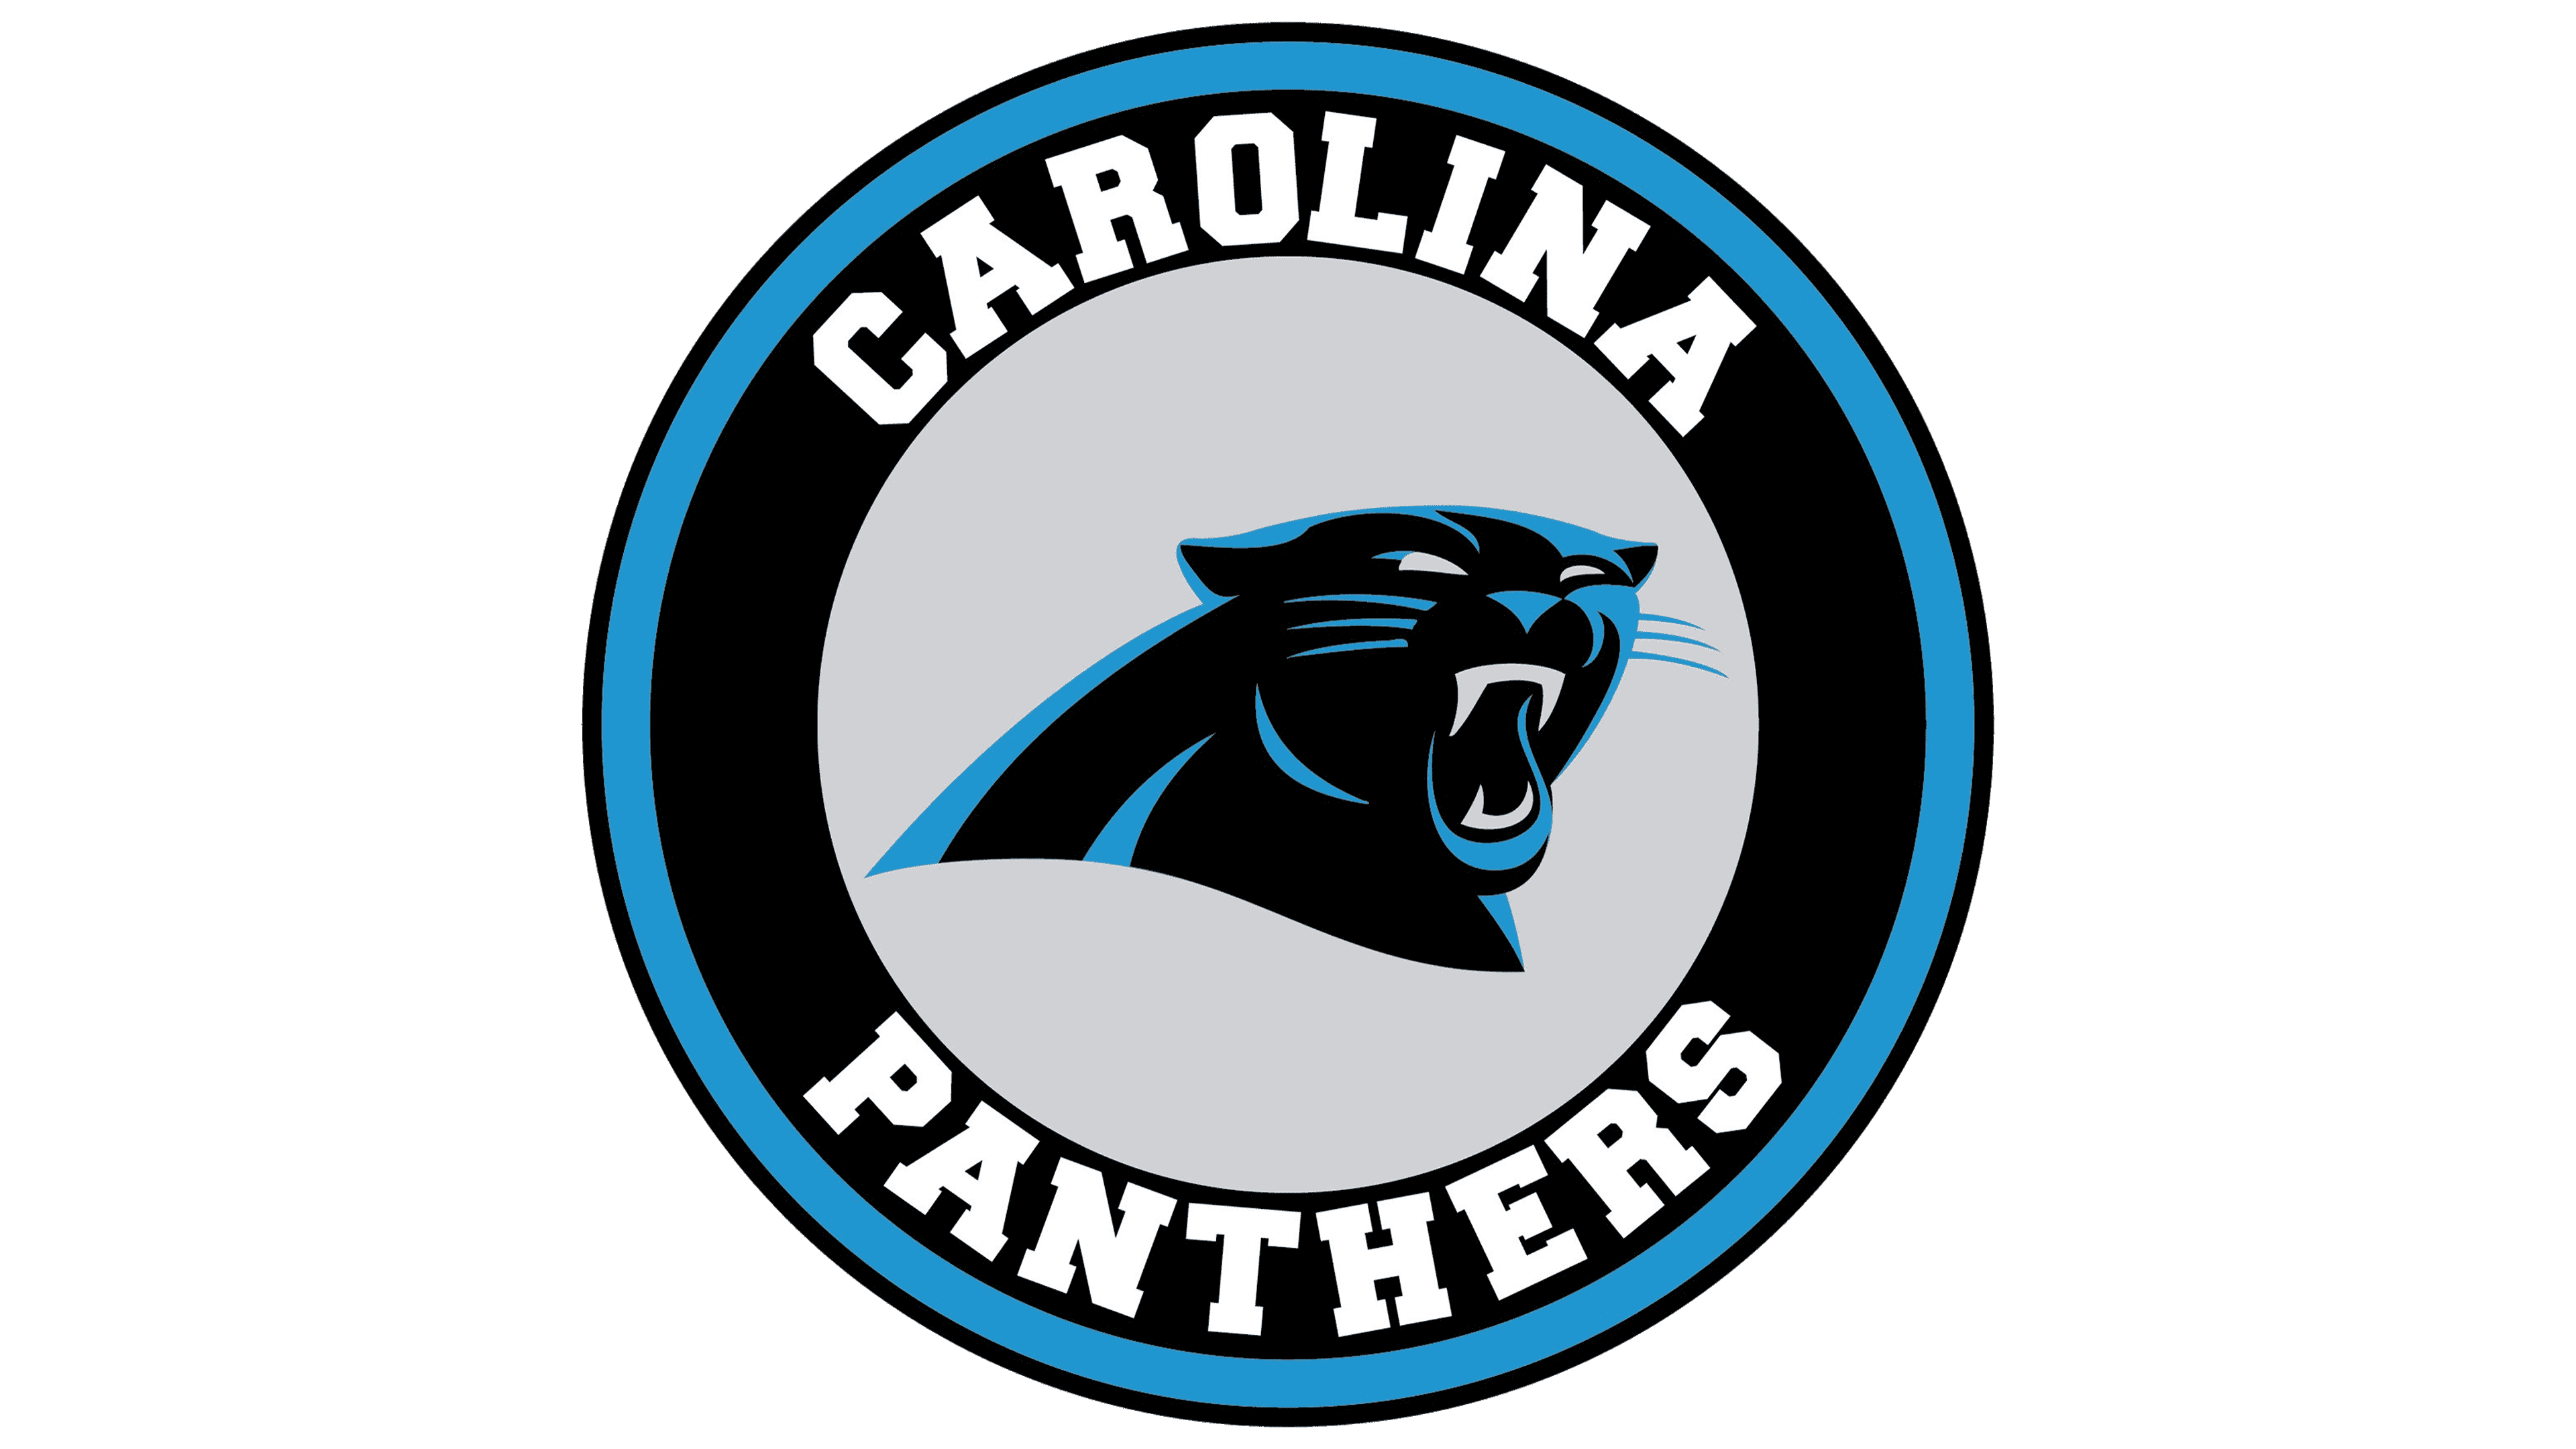 Carolina Panthers Logo And Sign New Logo Meaning And History Png Svg